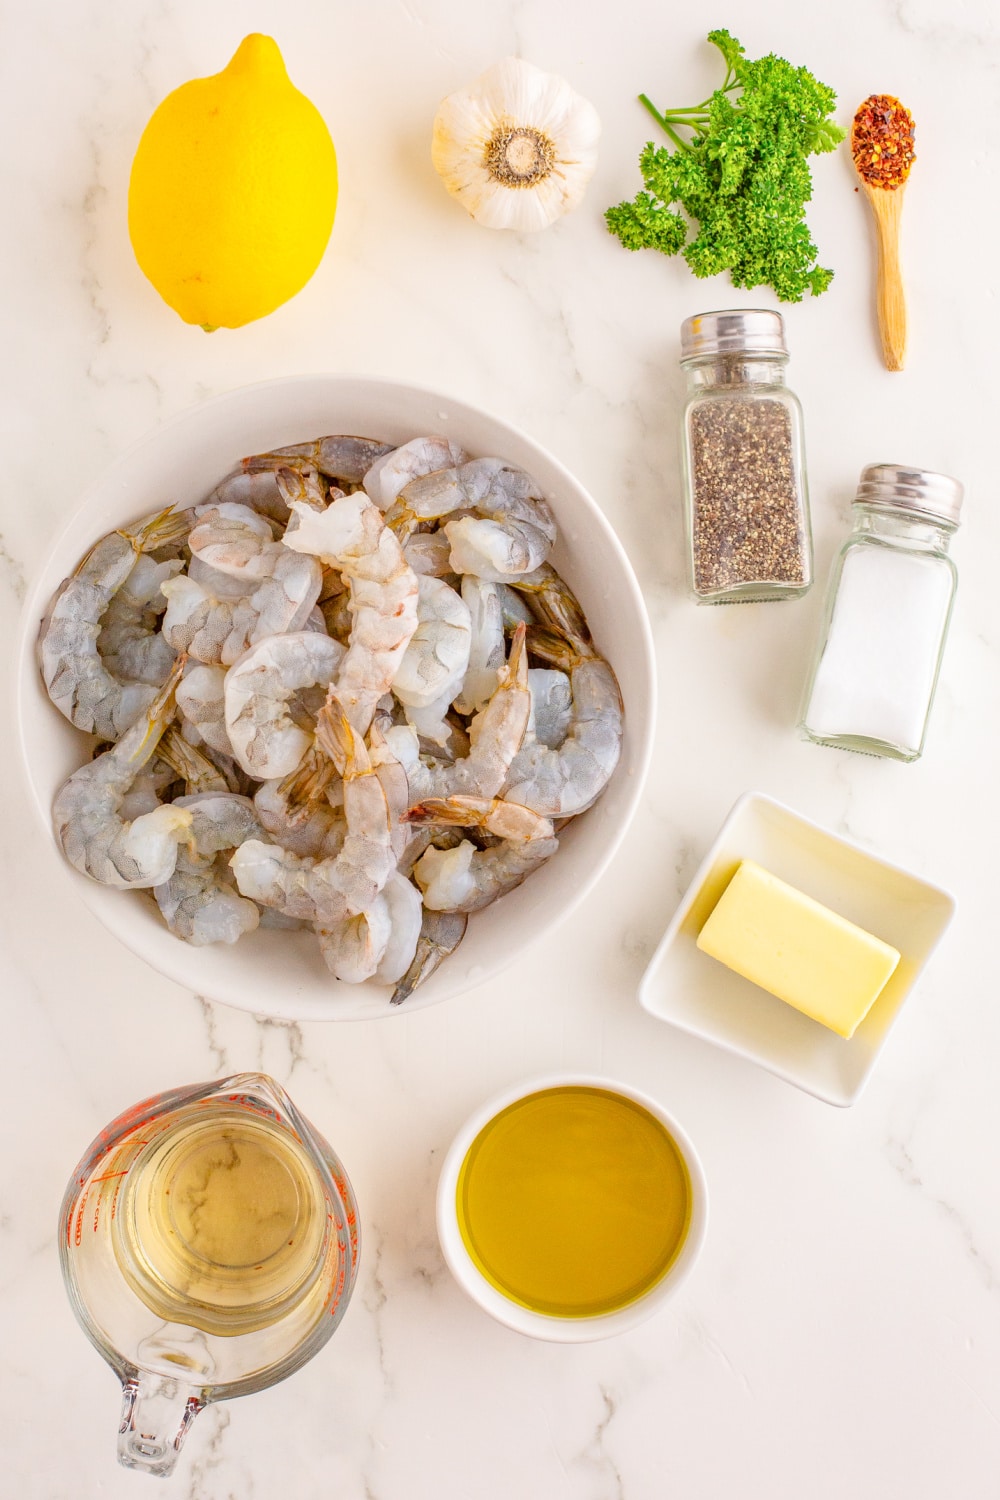 Ingredients needed to make Shrimp Scampi presented on a white marble countertop.